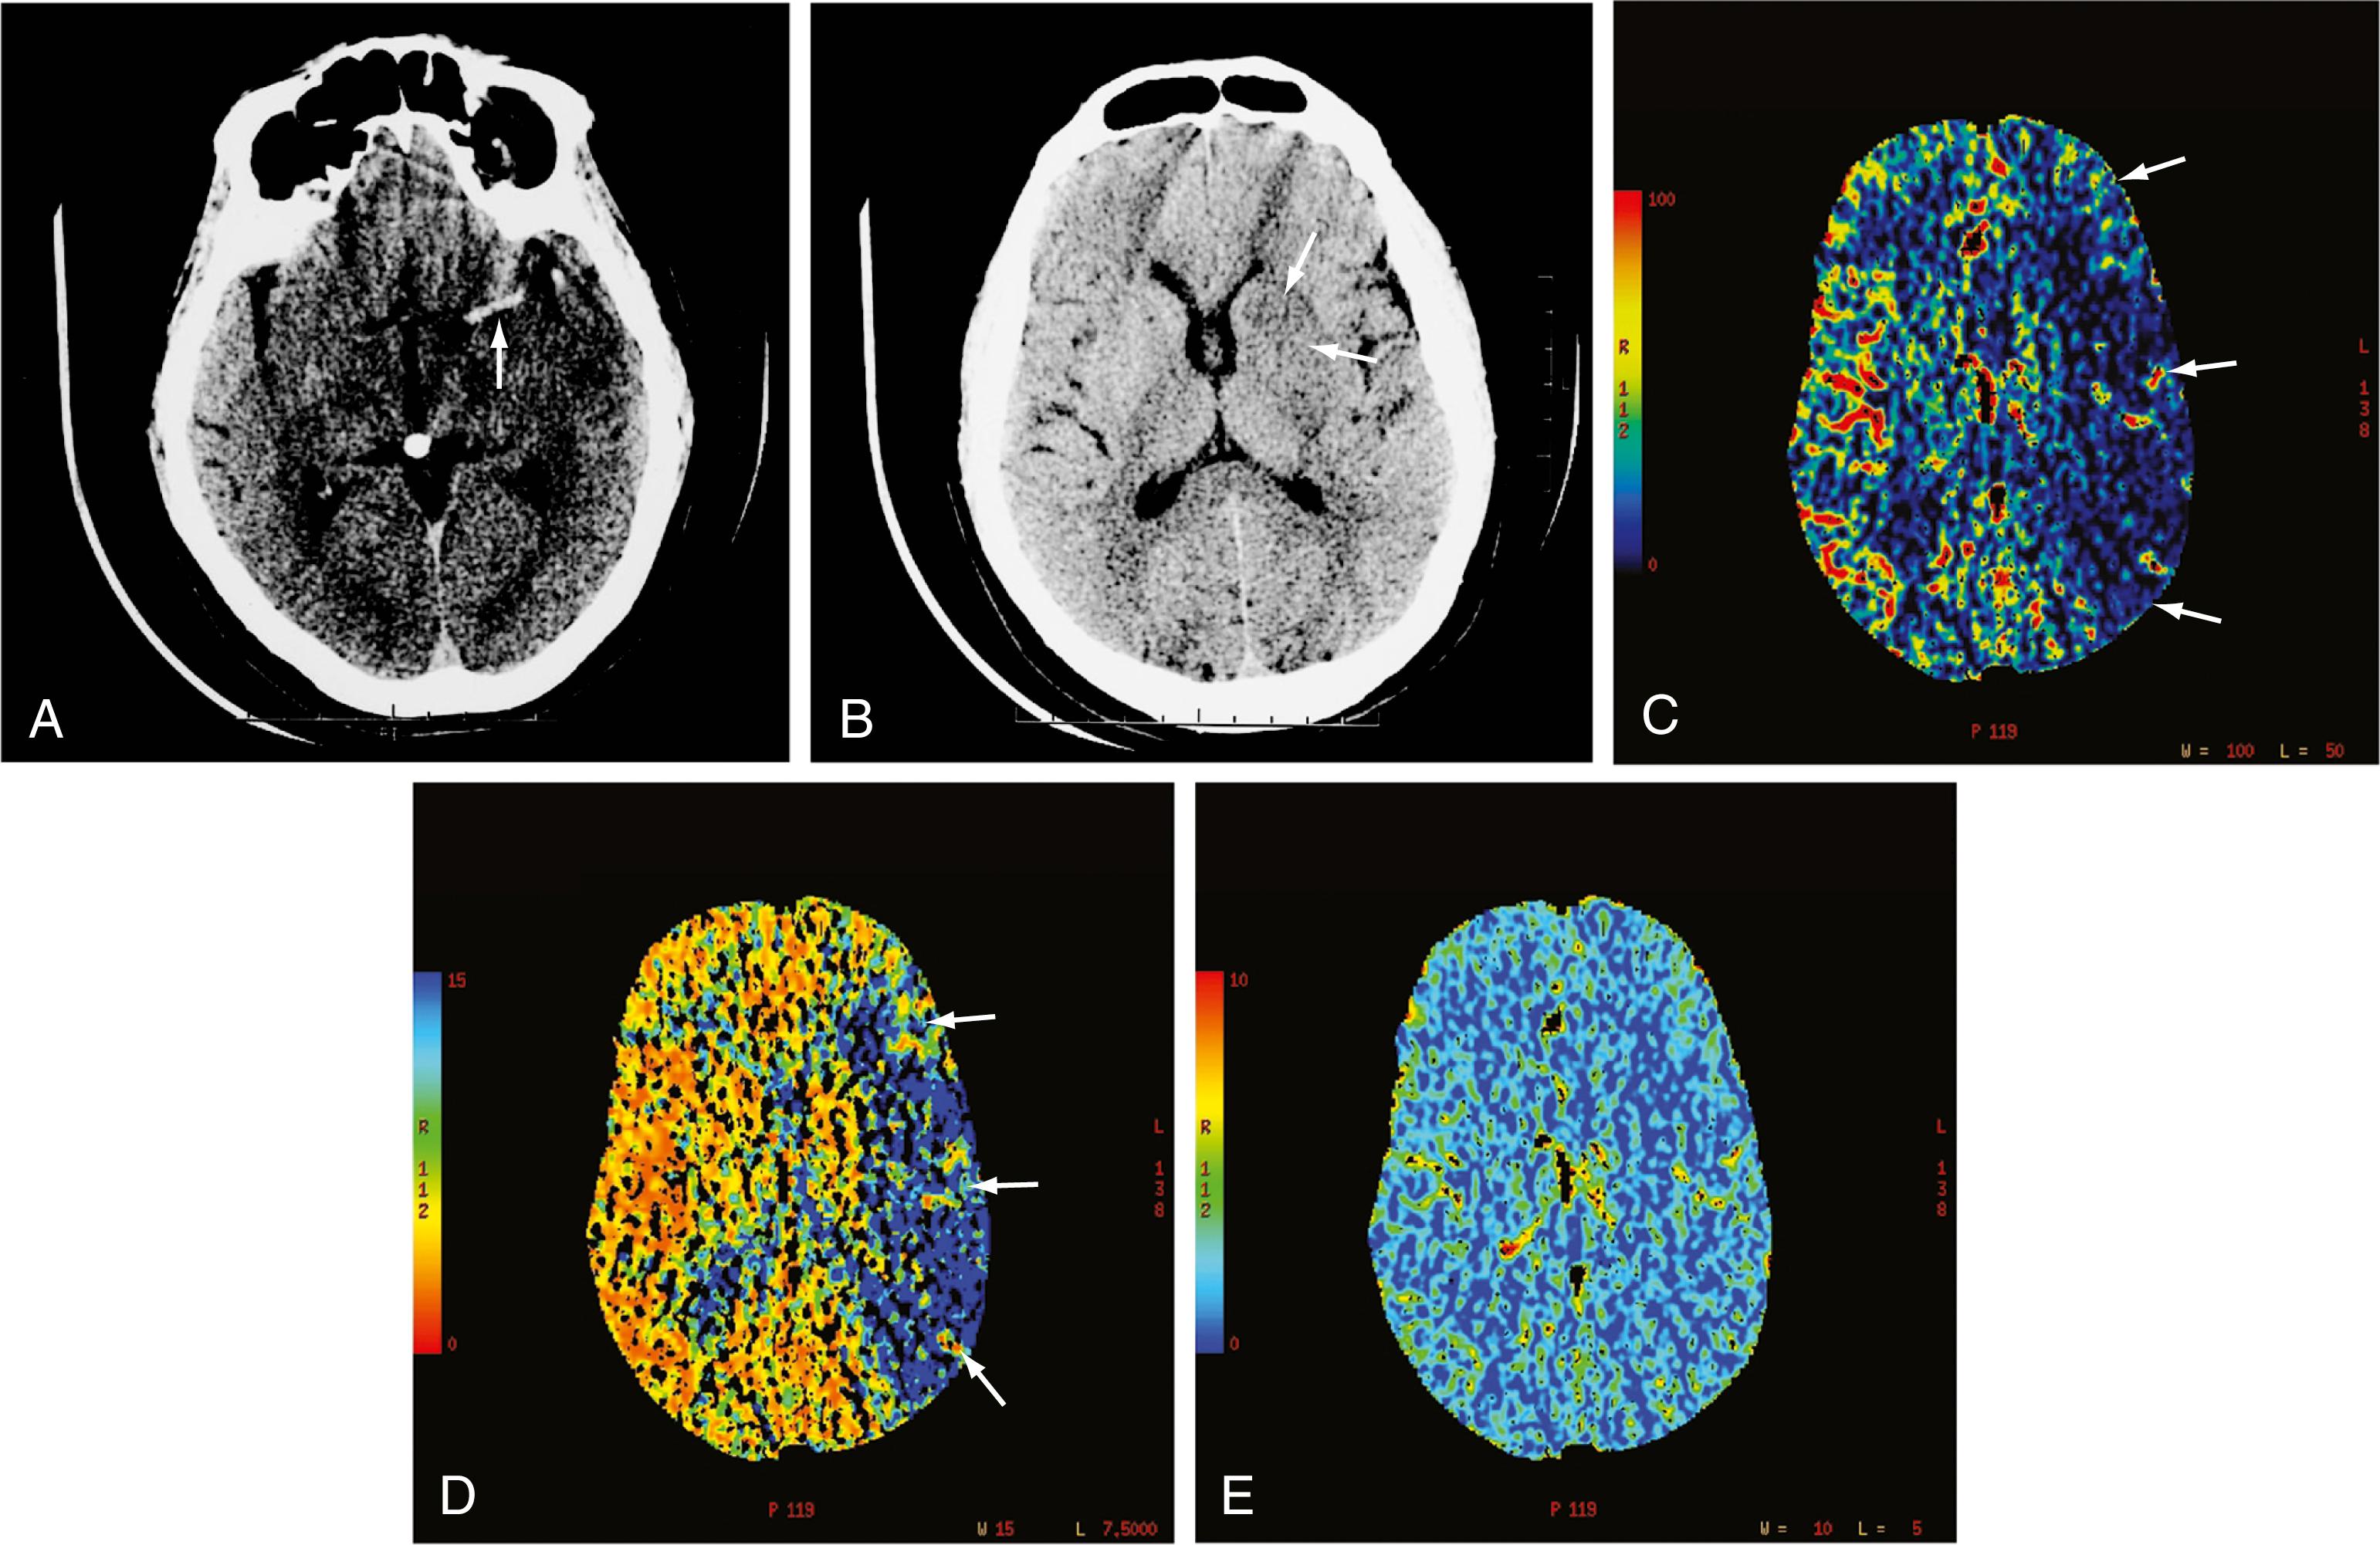 Figure 10.7, Computed tomographic (CT) images of the left middle cerebral artery (MCA).